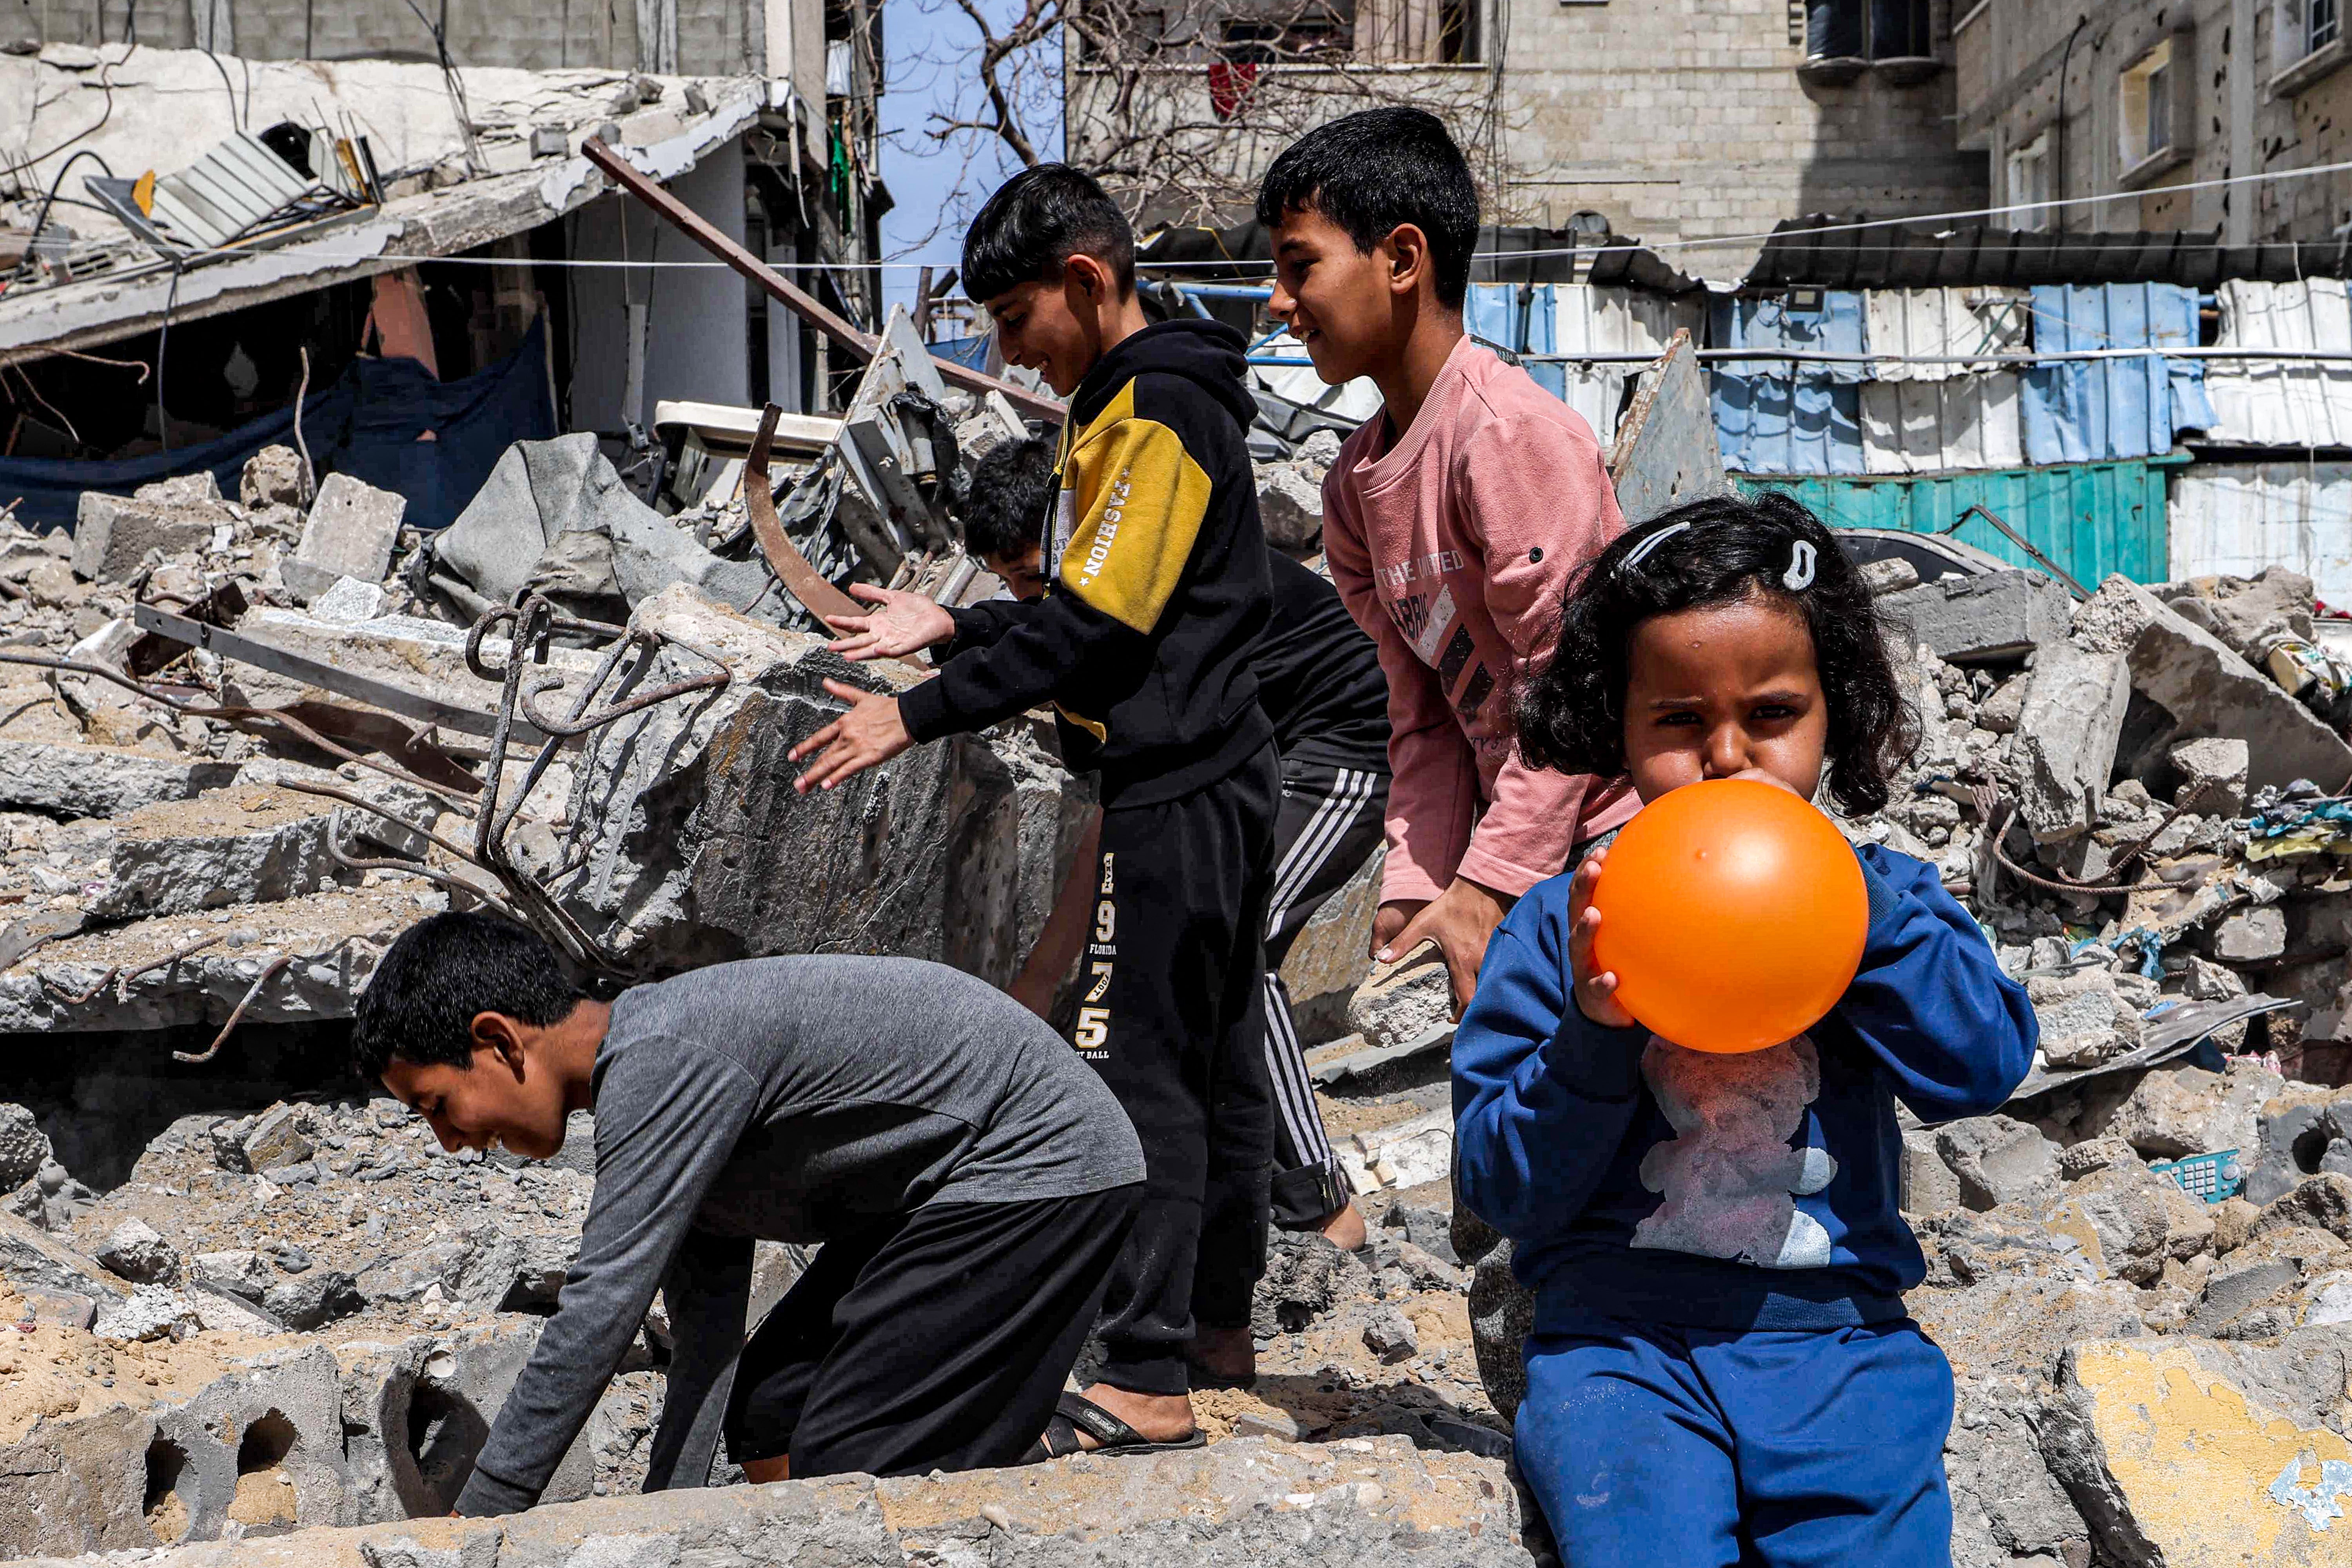 Palestinian children play amongst the rubble in Rafah